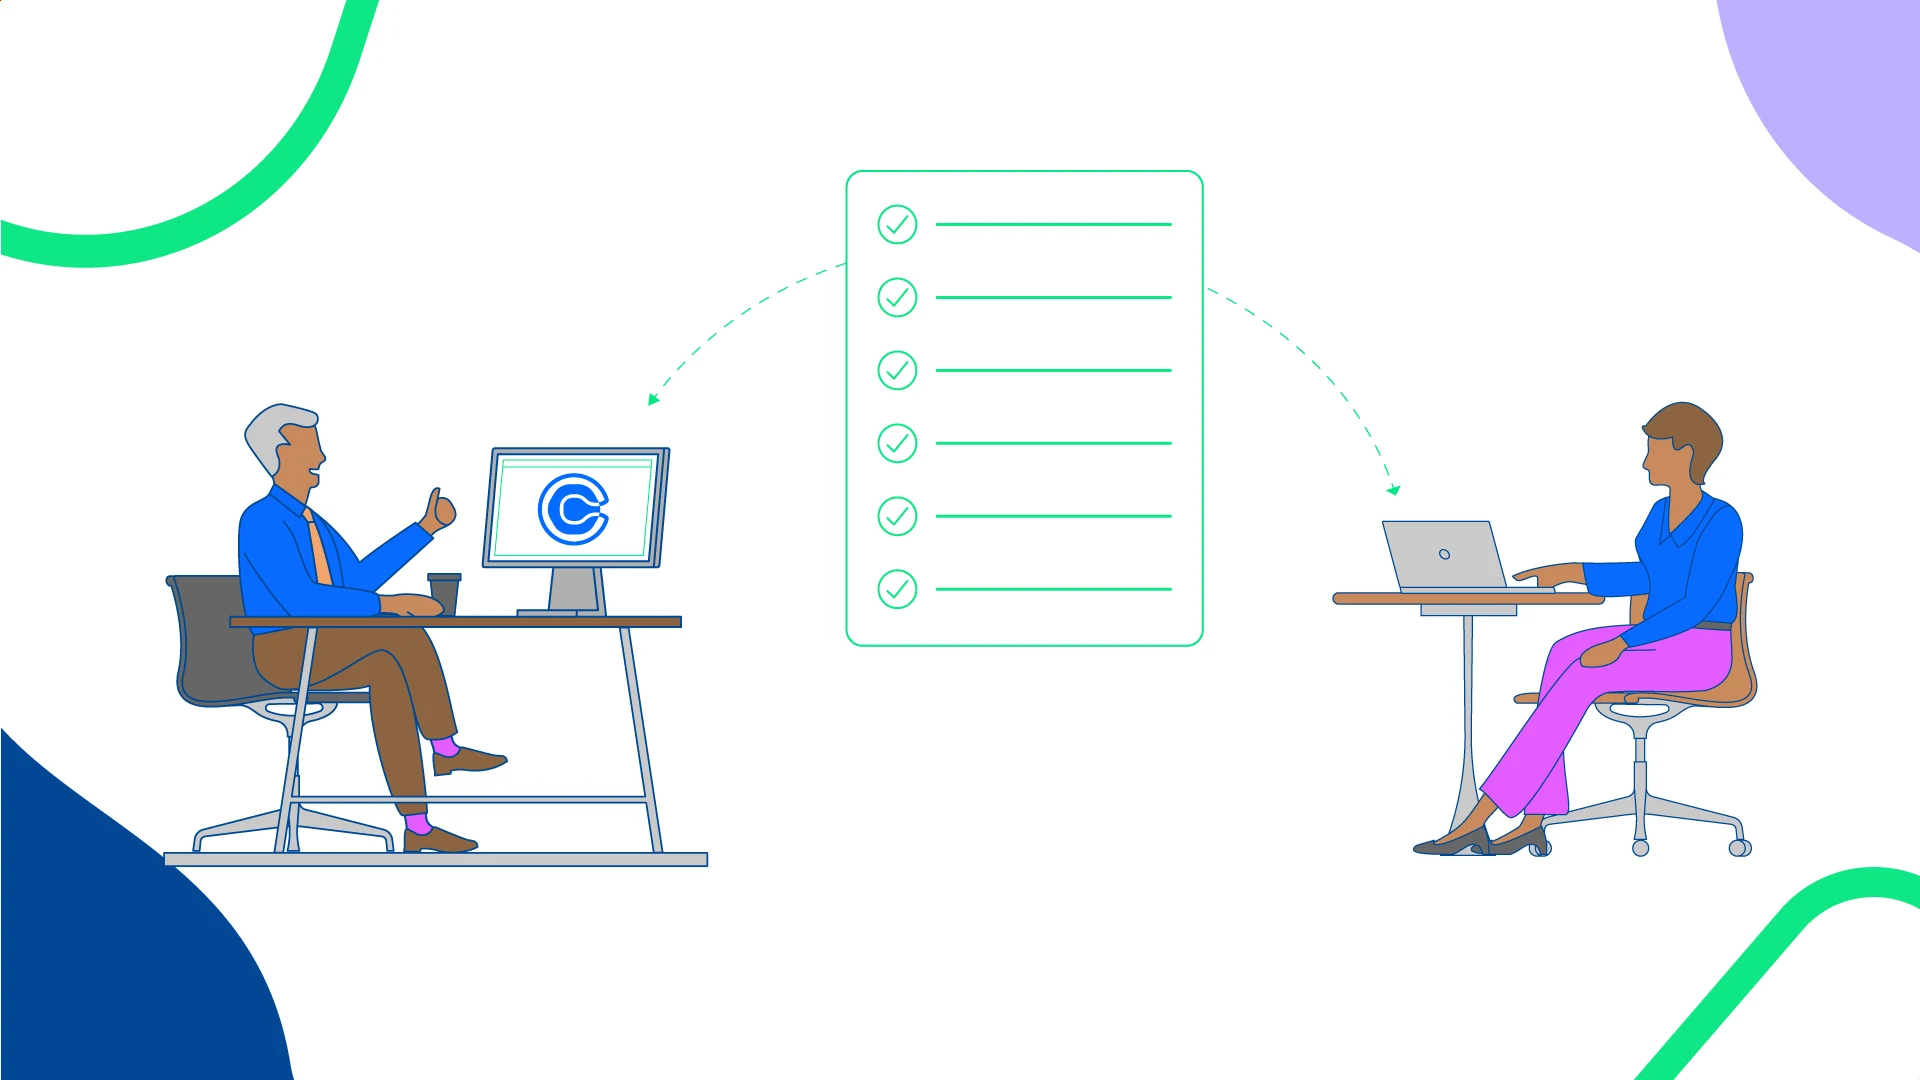 Hero - onboarding remote employees and increasing retention